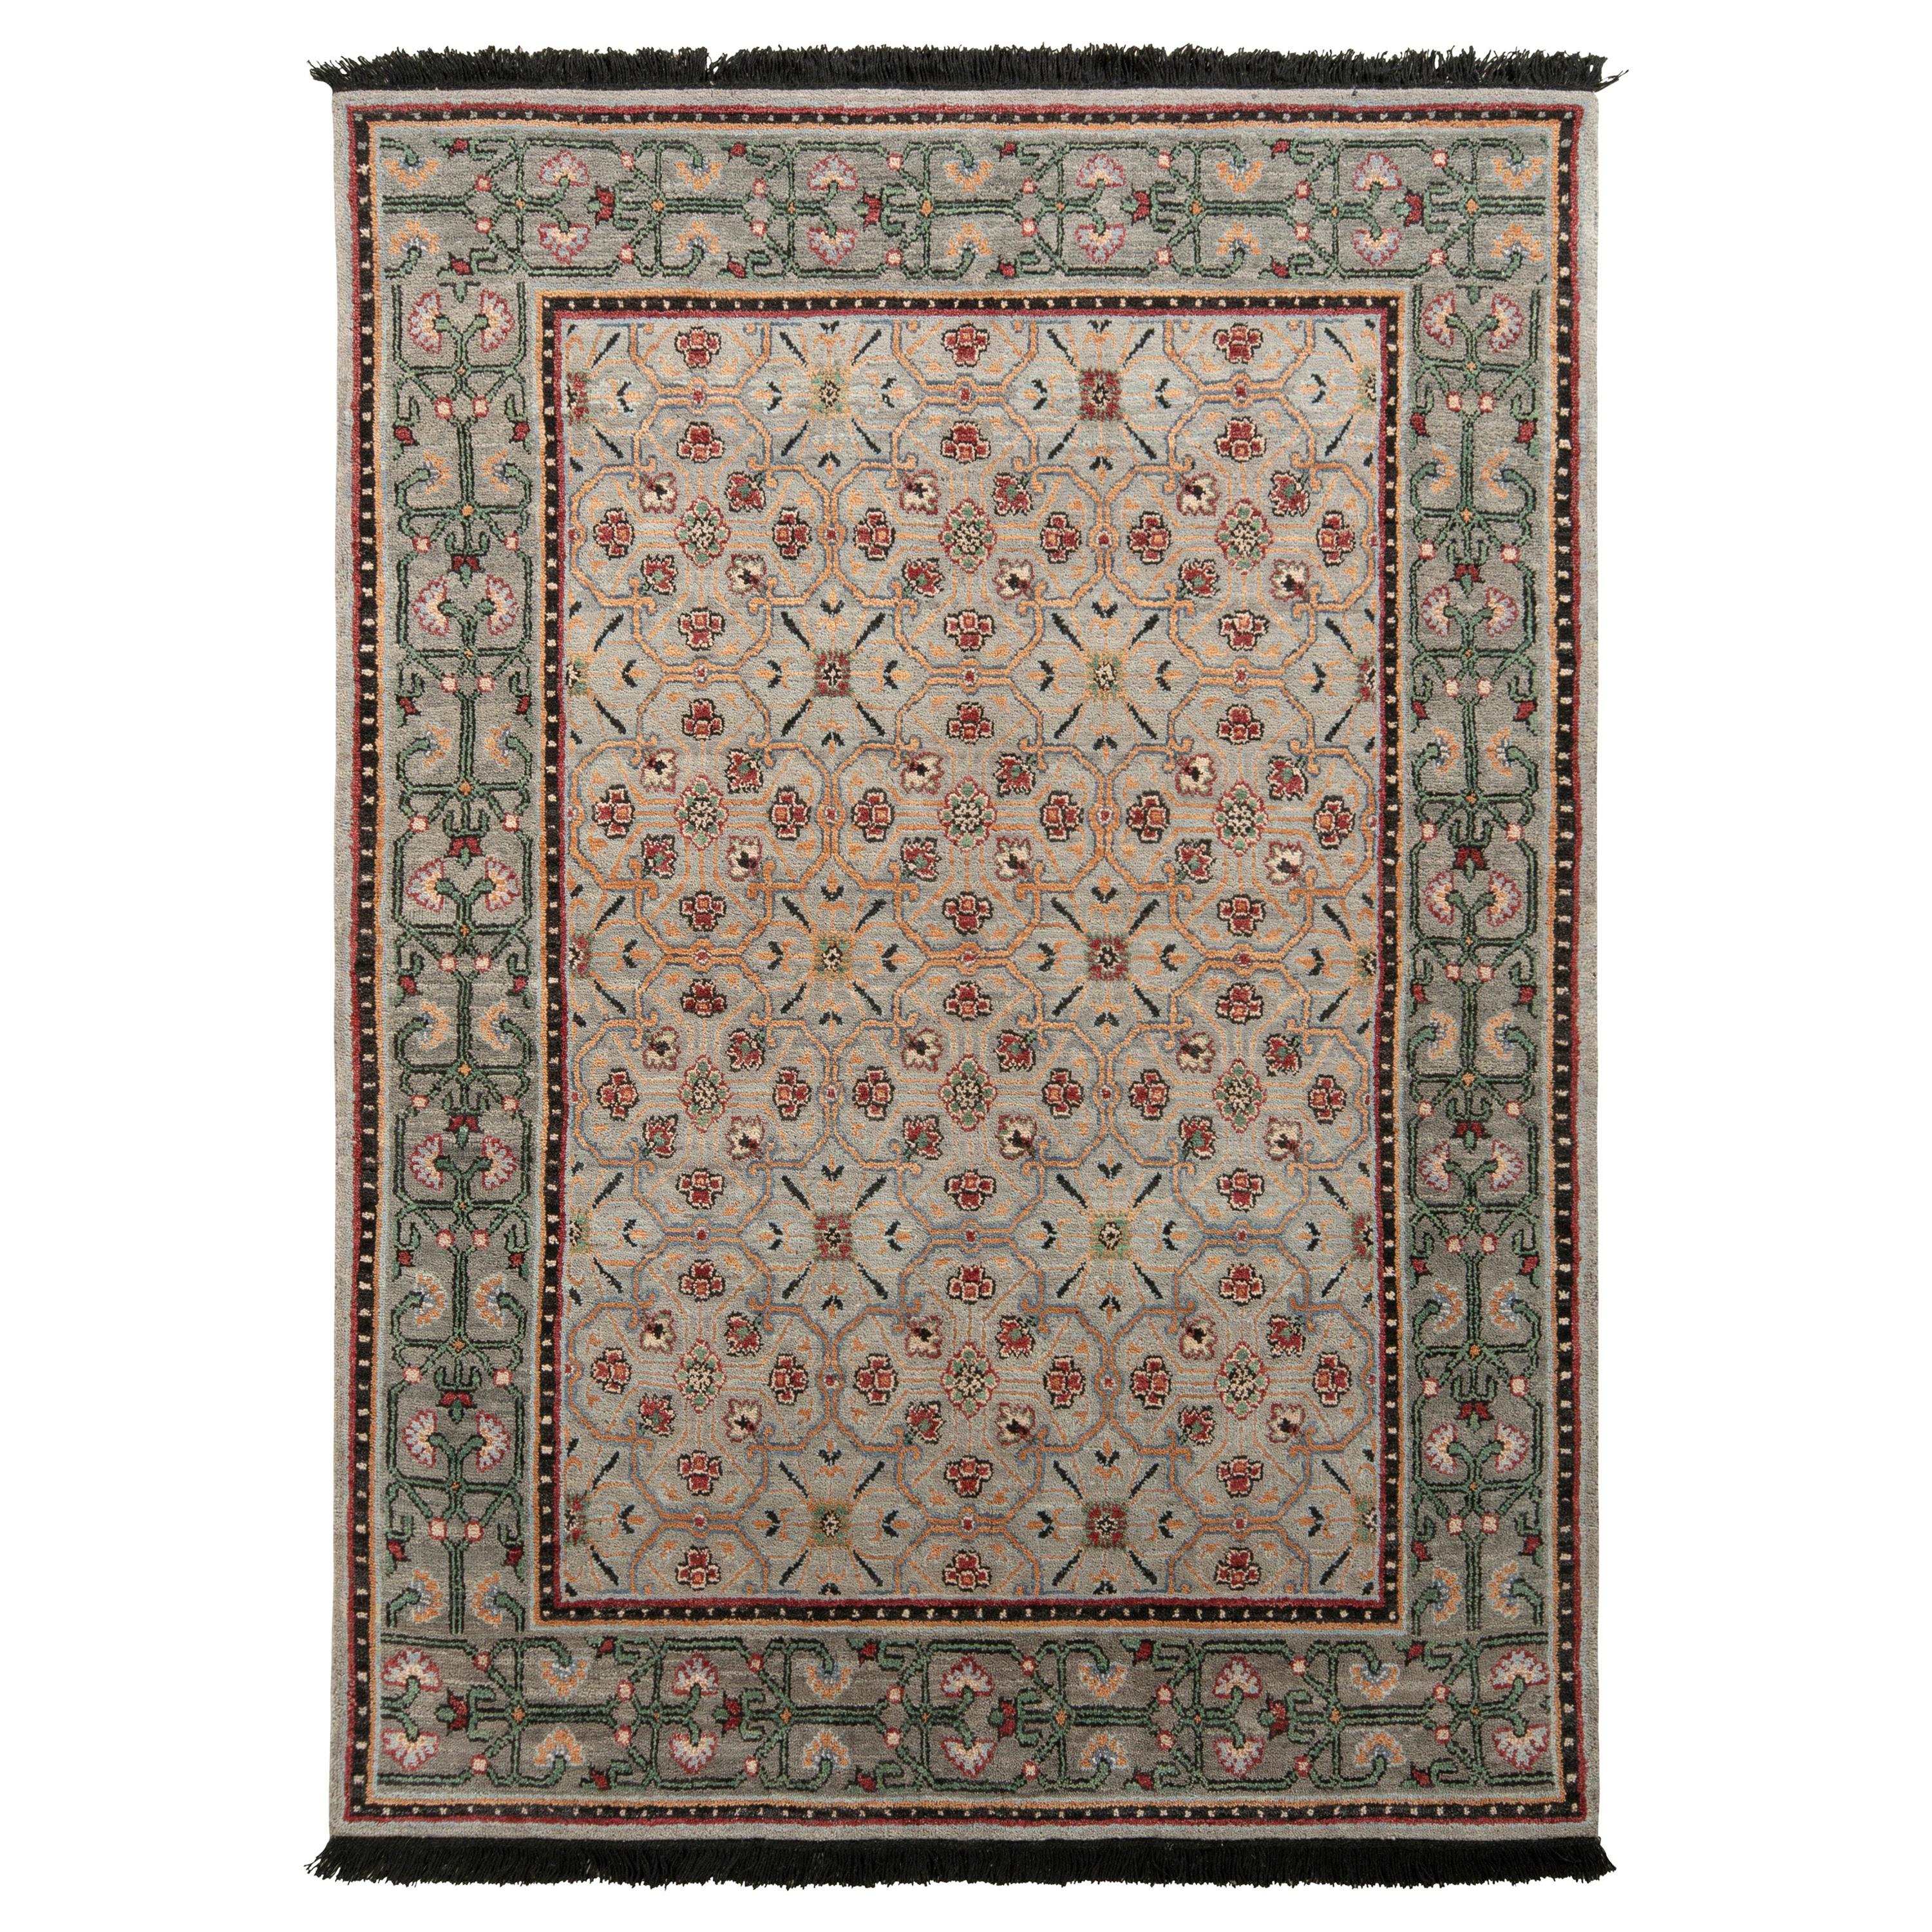 Rug & Kilim’s Transitional Style Rug in Green and Blue All over Floral Pattern